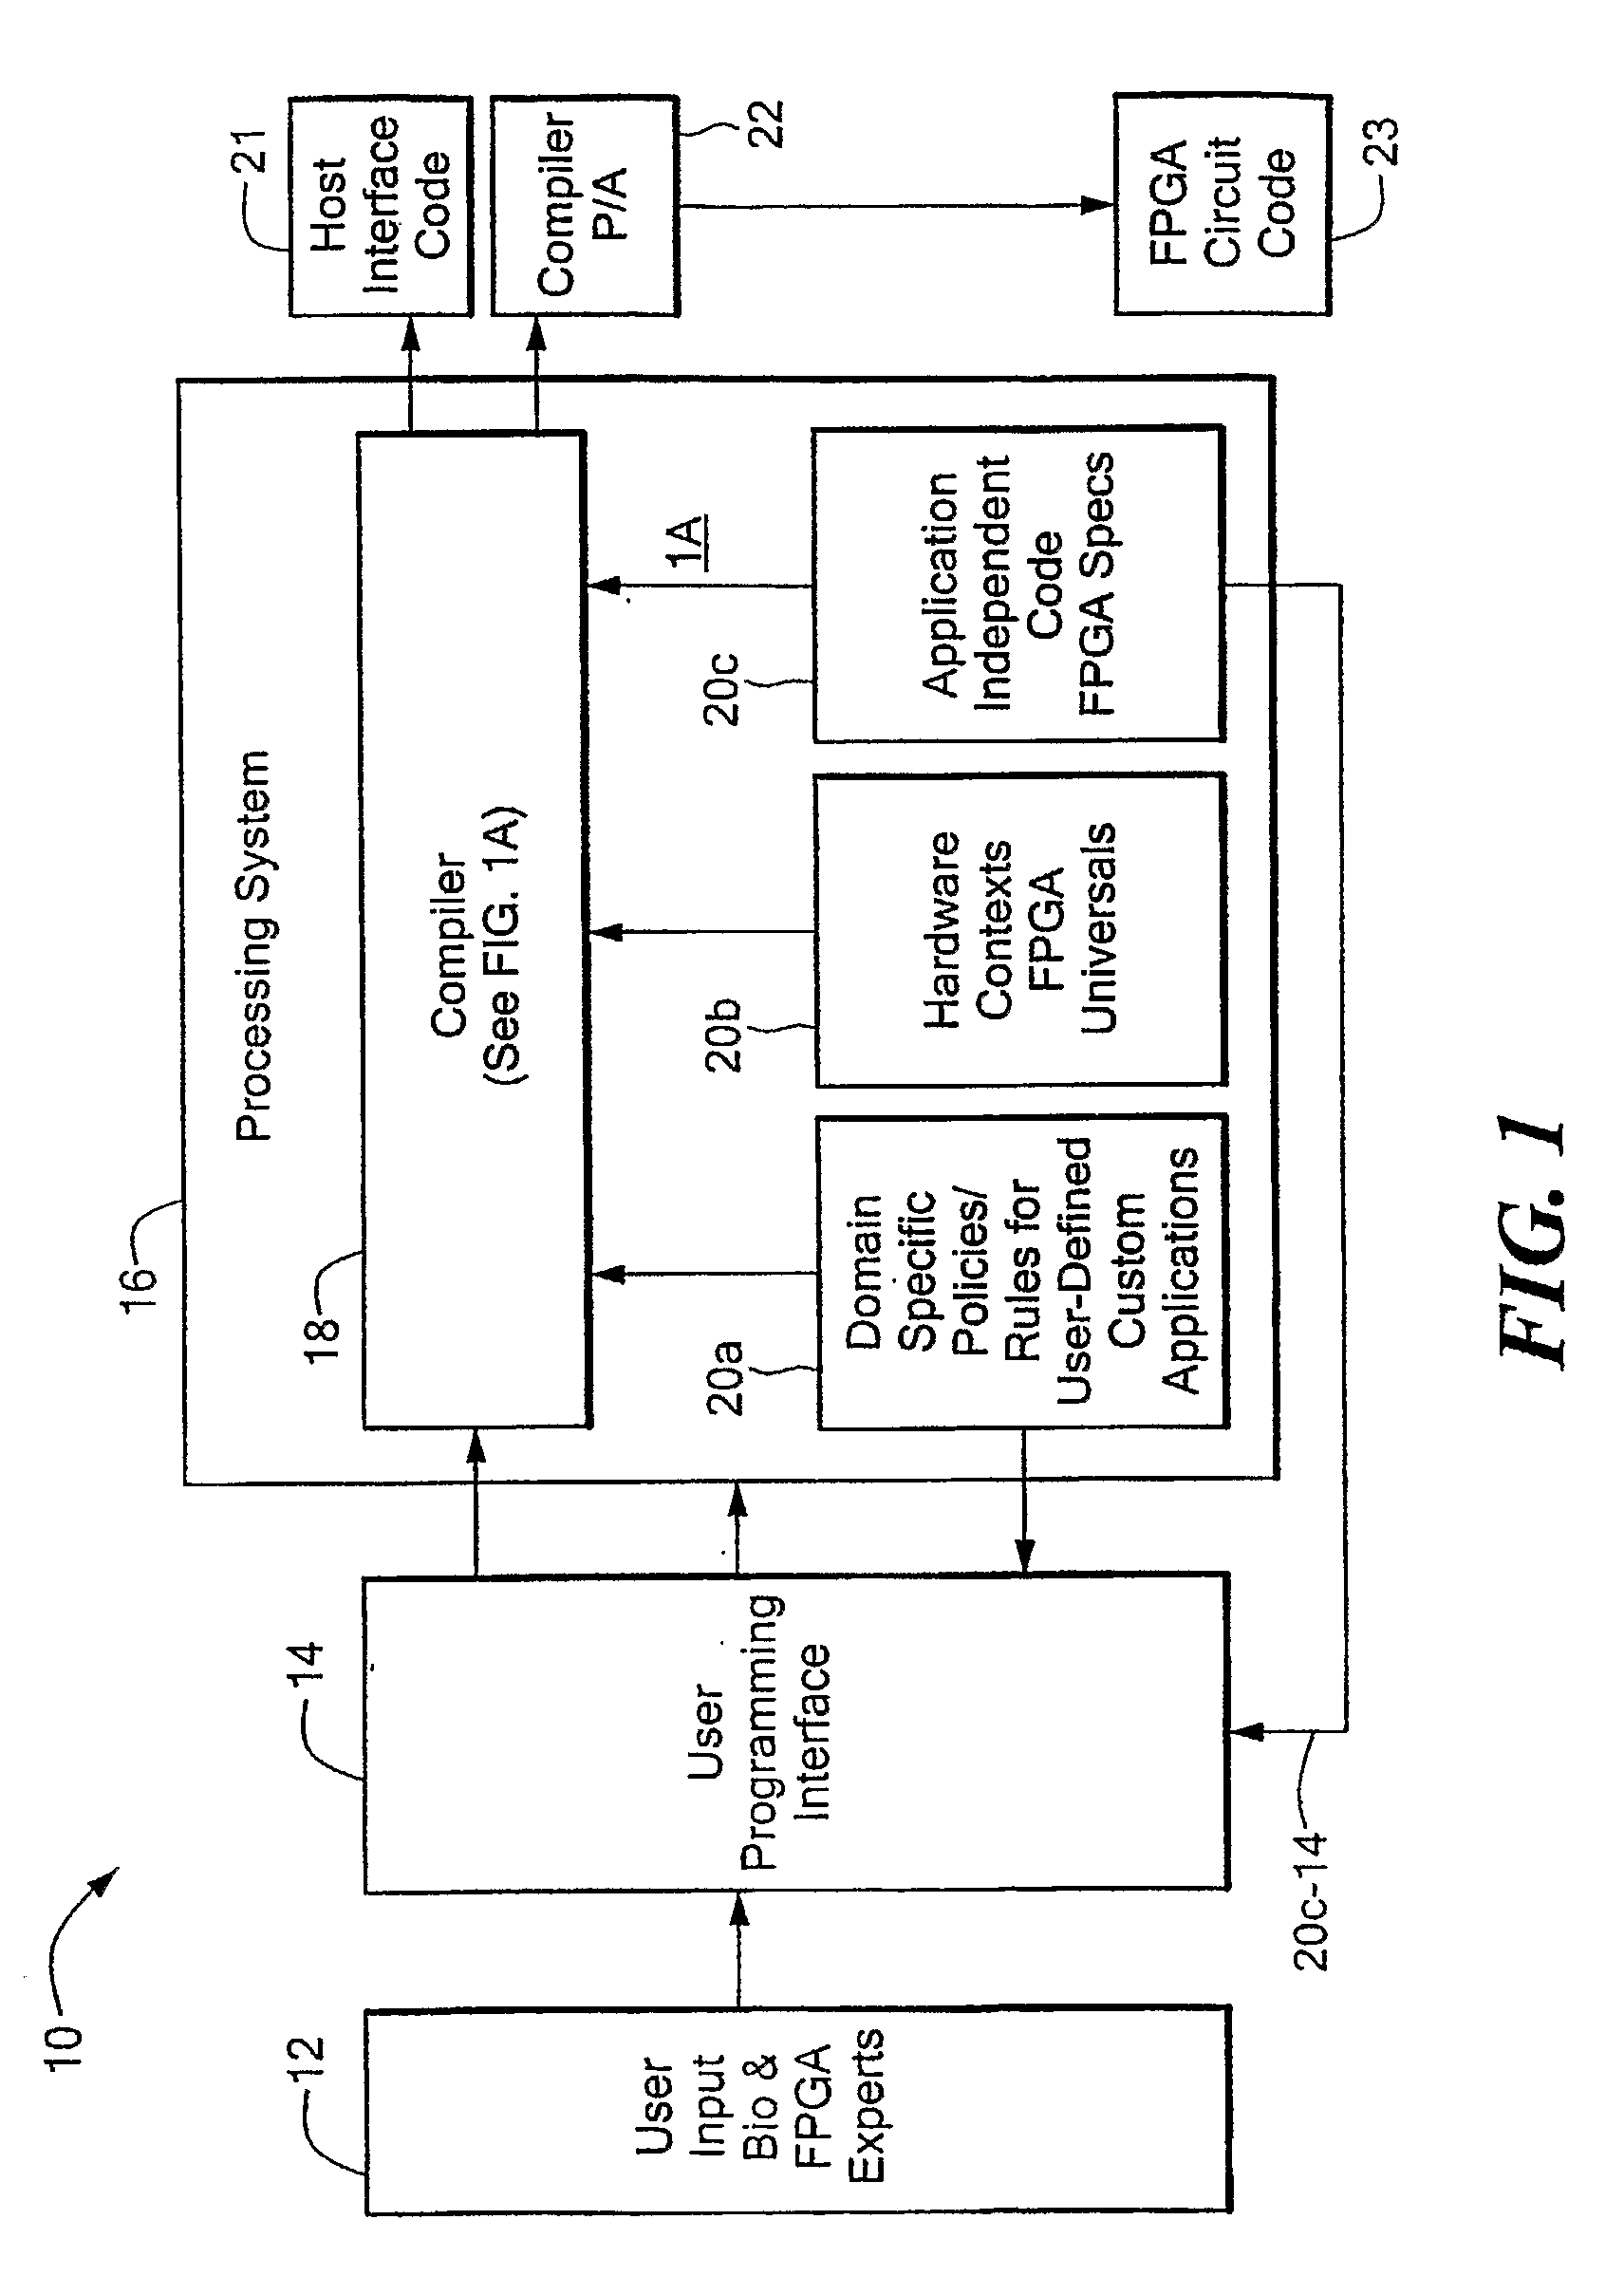 System and Method for Programmable Logic Acceleration of Data Processing Applications and Compiler Therefore